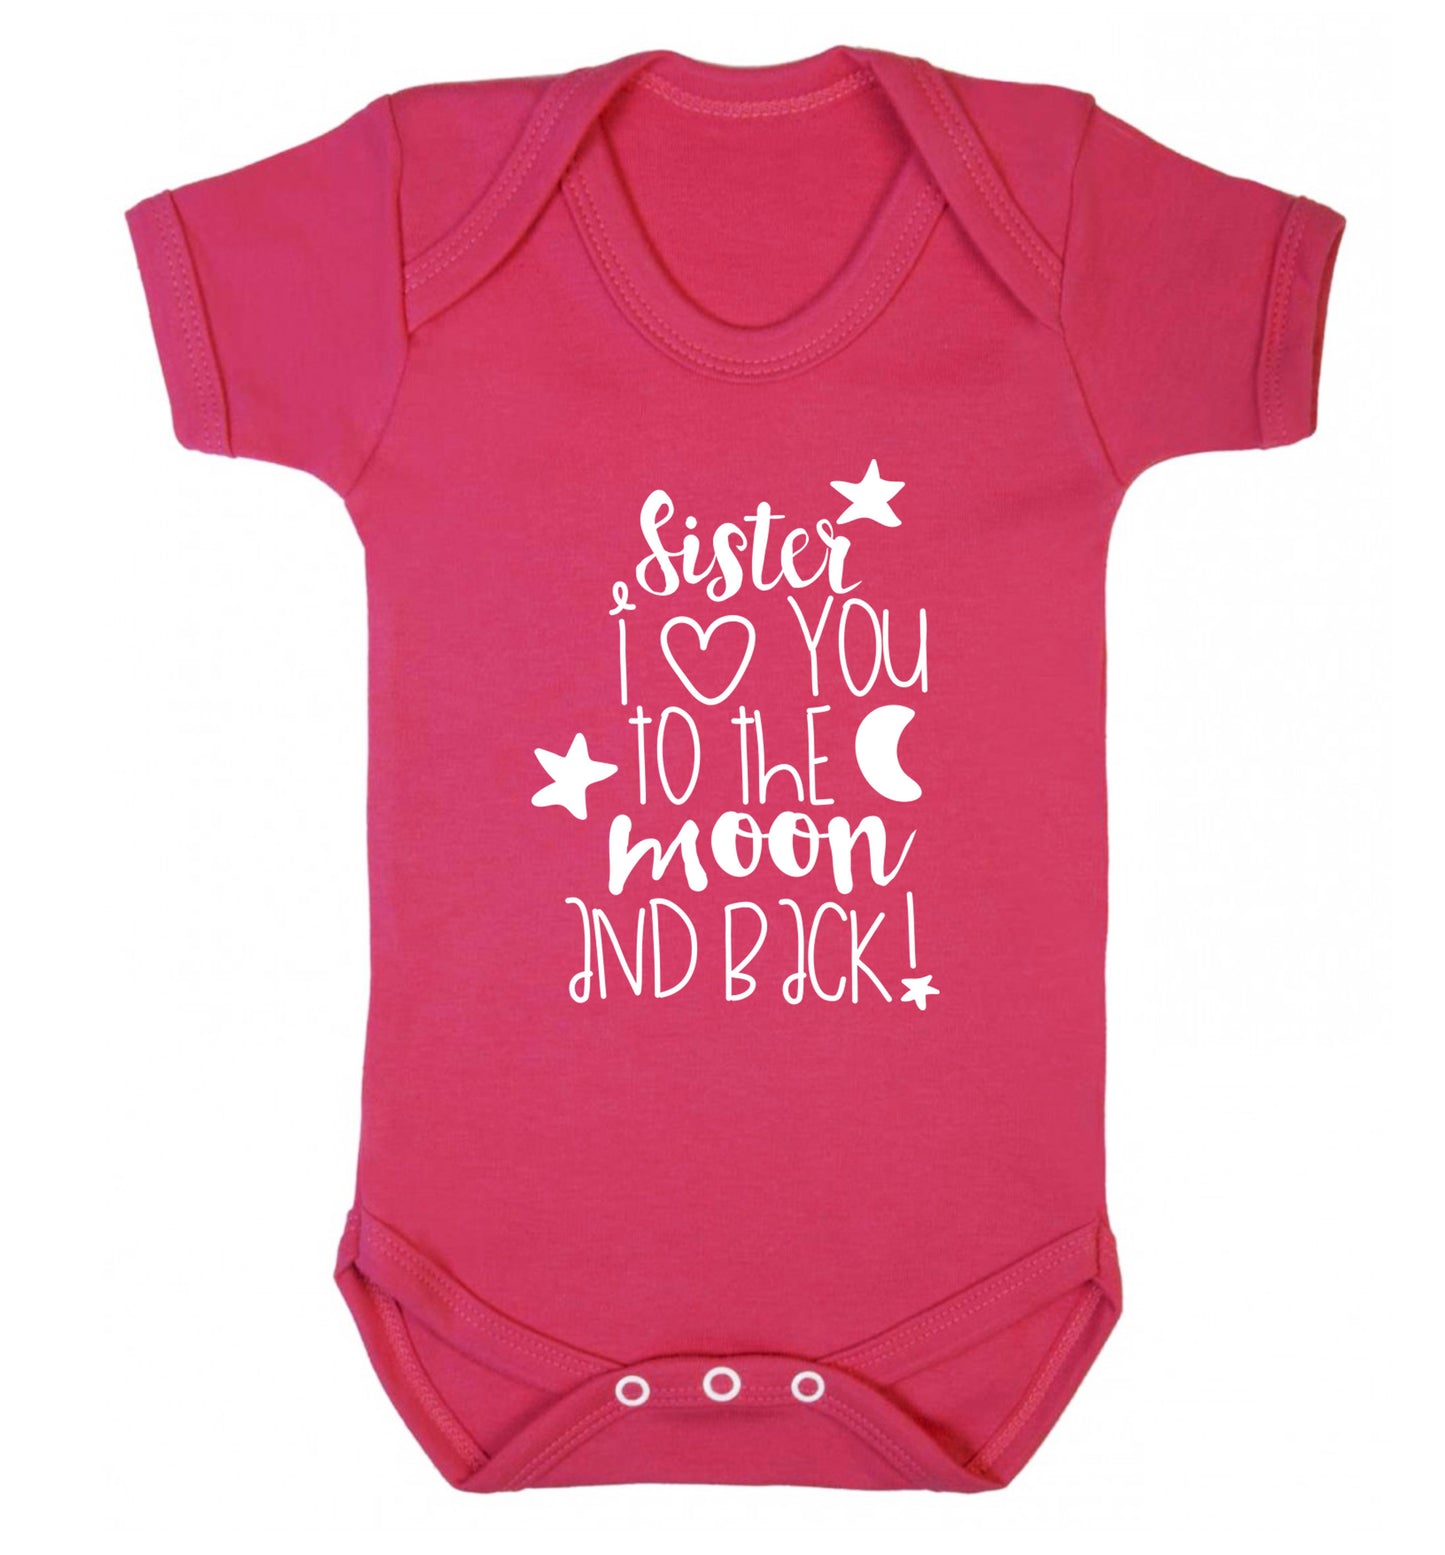 Sister I love you to the moon and back Baby Vest dark pink 18-24 months